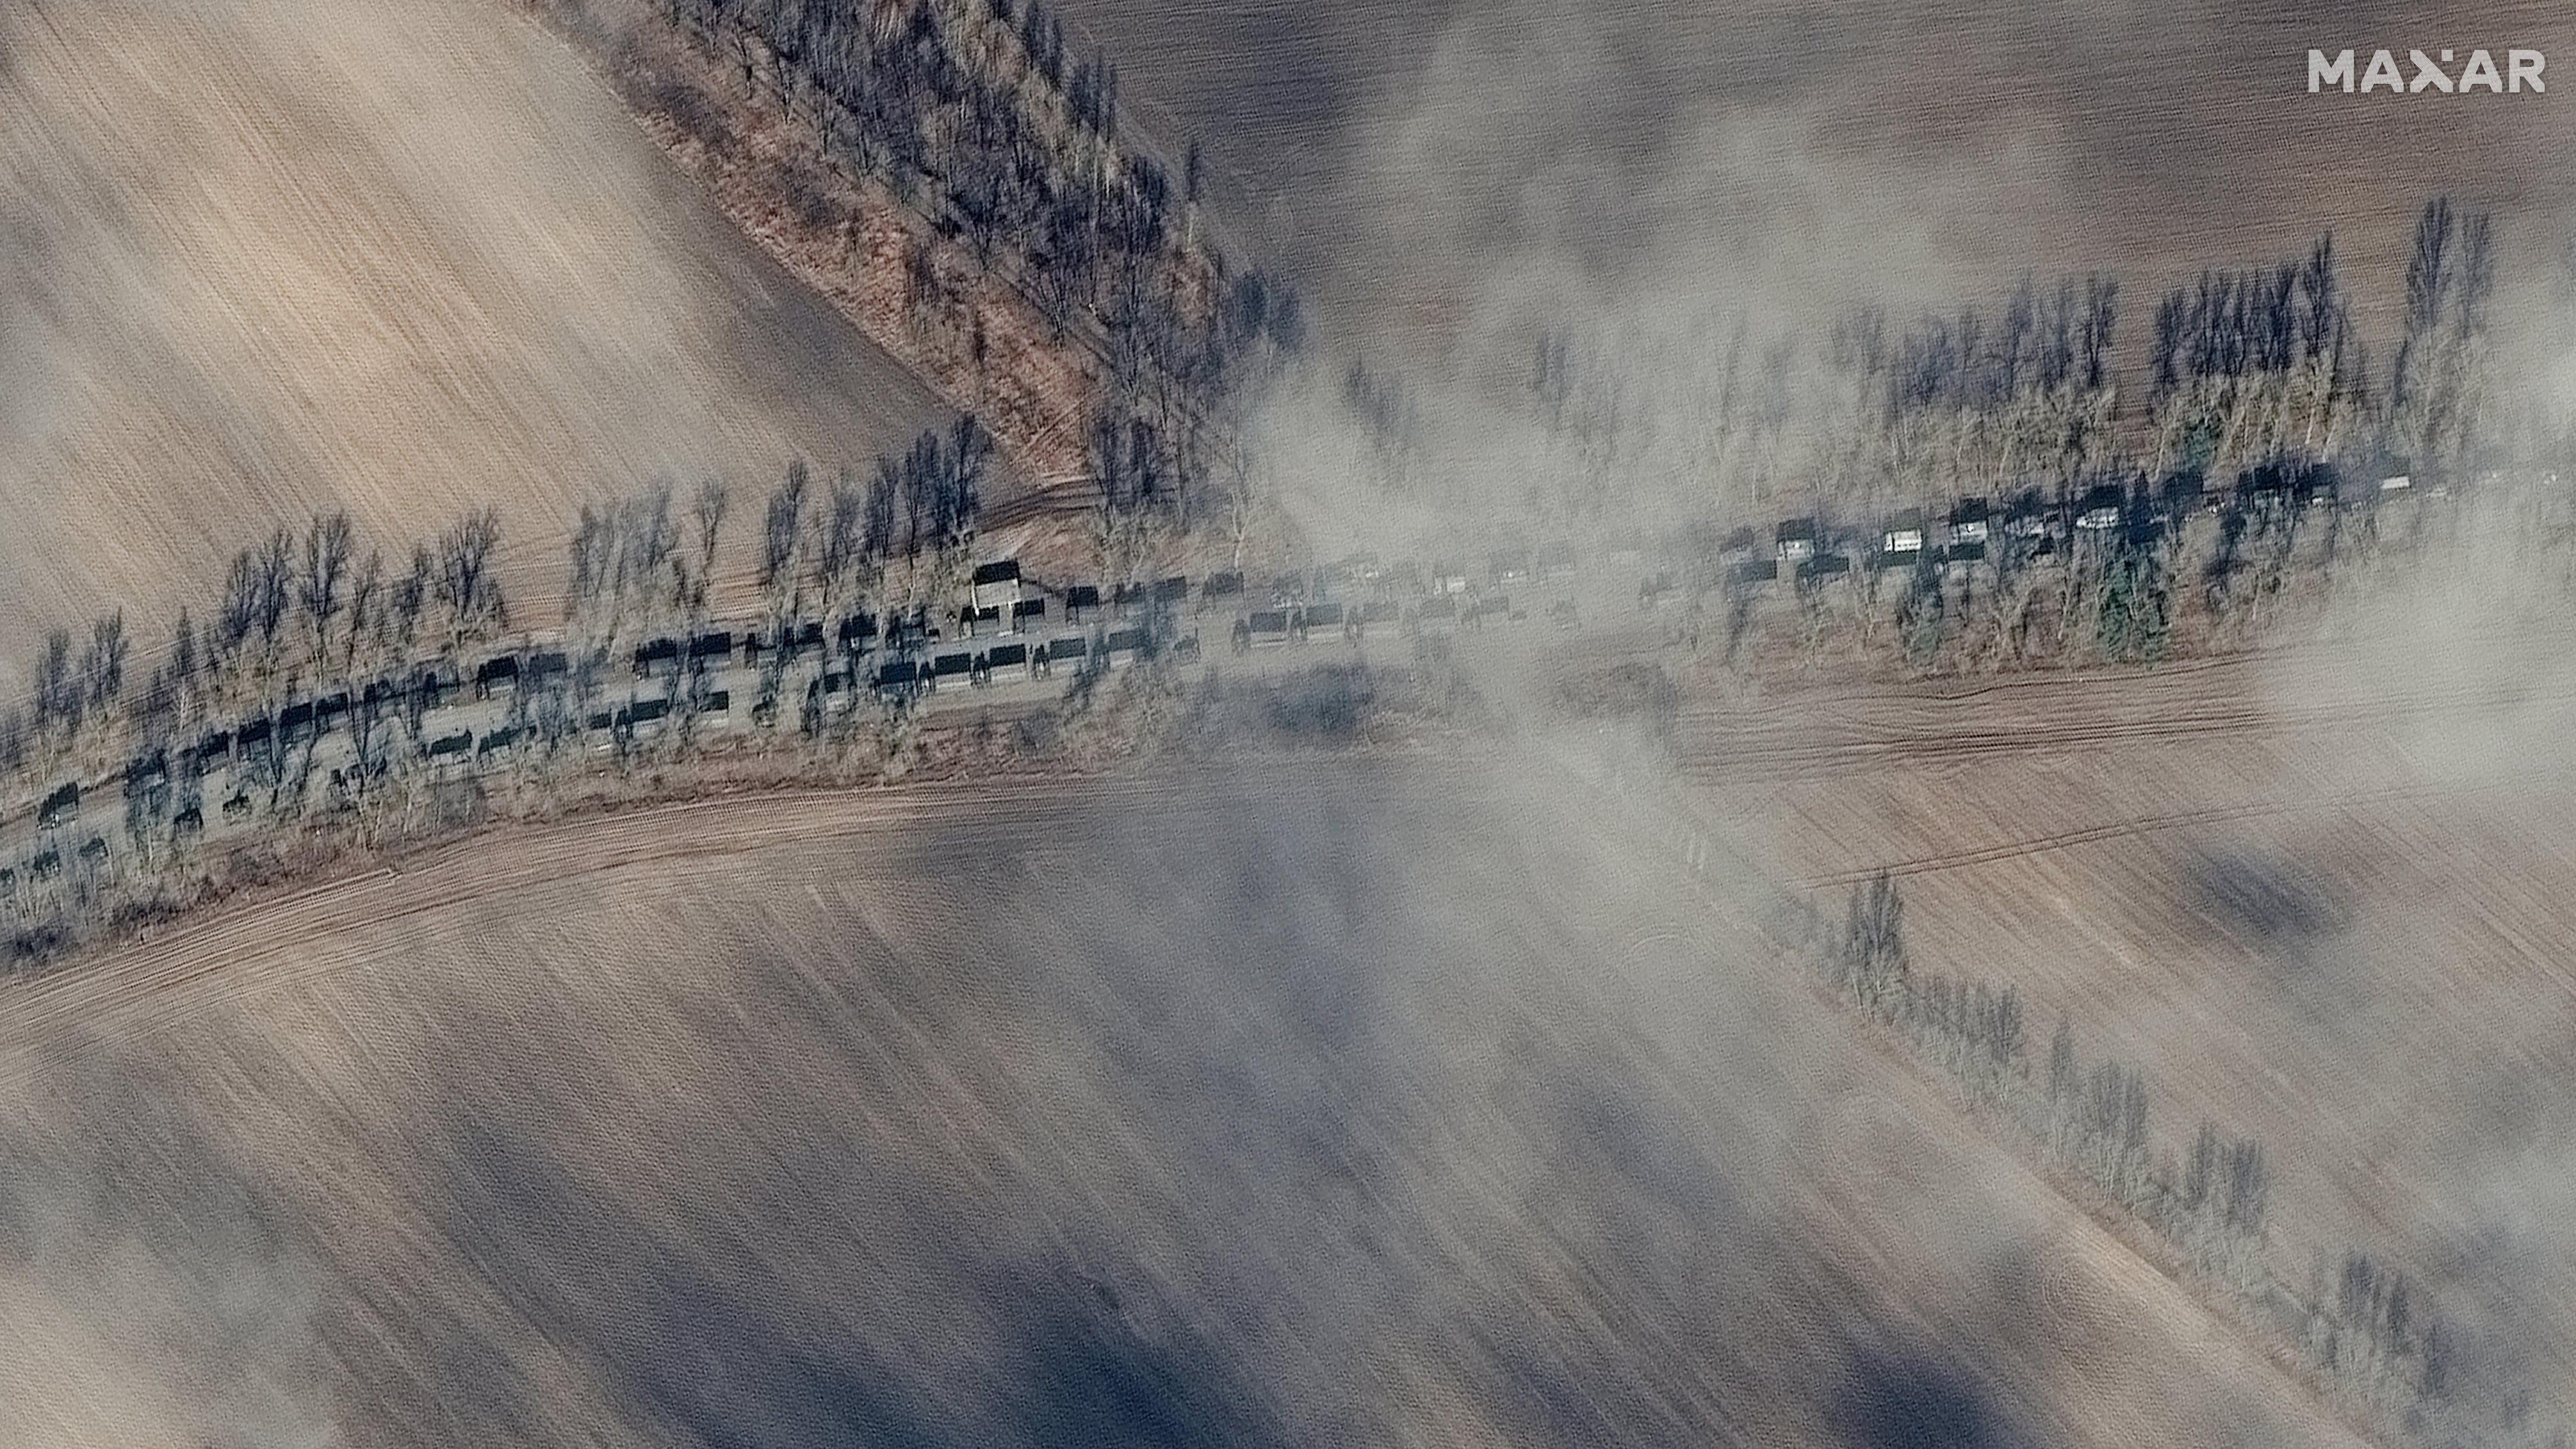 RUSSIANS INVADE UKRAINE -- FEBRUARY 27, 2022:  03 Maxar high-resolution satellite close up view near southern end of armored equipment and ground forces convoy, Ivankiv, Ukraine.  27feb2022_wv3.  Please use: Satellite image (c) 2022 Maxar Technologies.